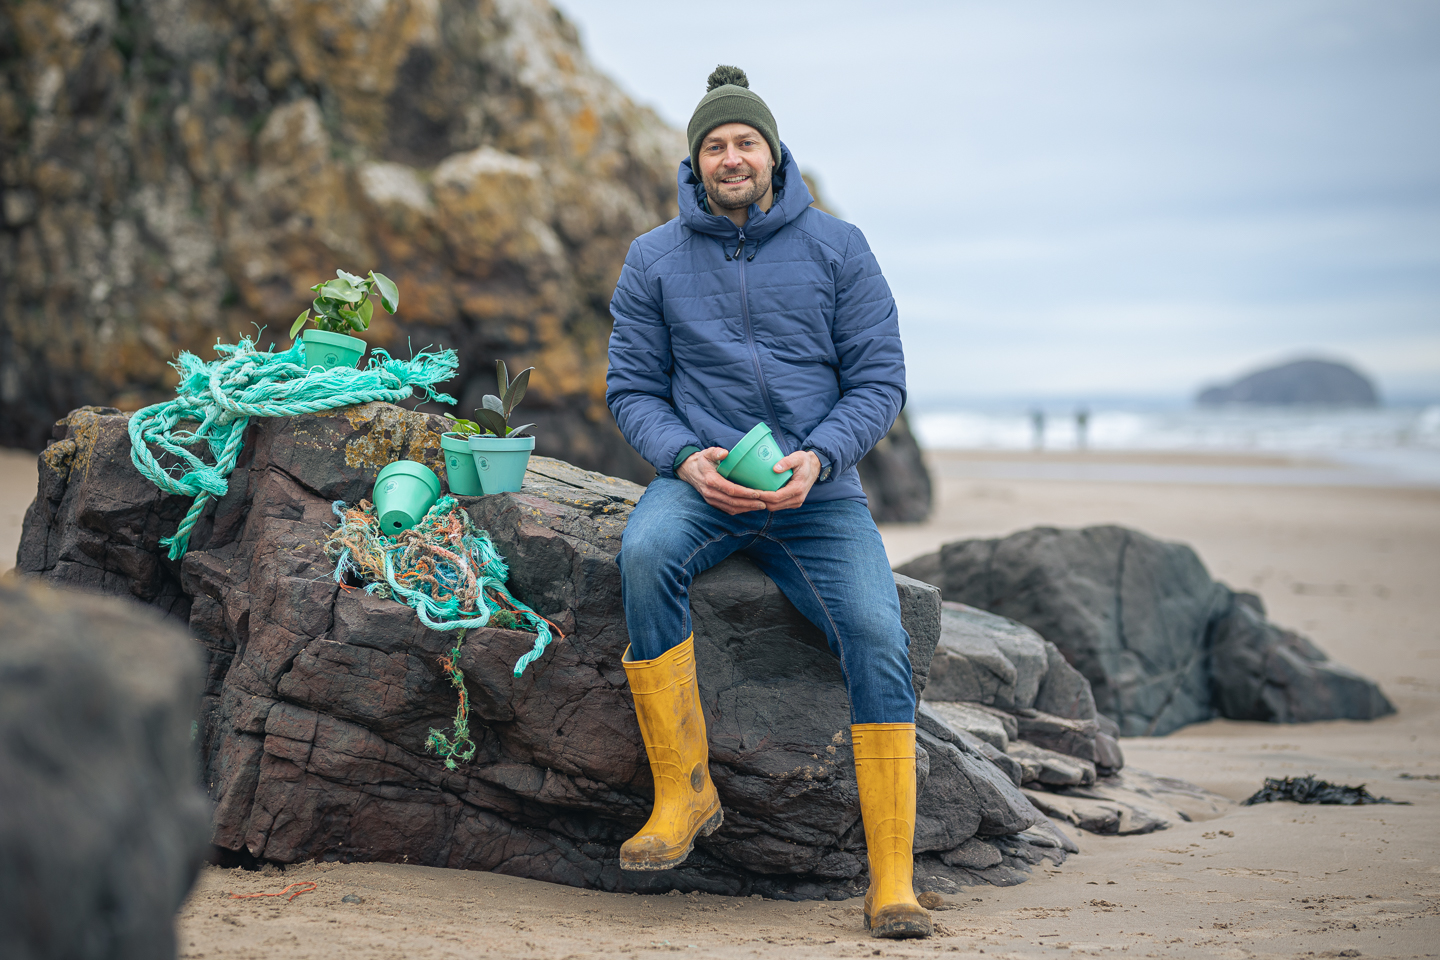 Ocean Plastic Pots helps to turn the tide thanks to Business Gateway support